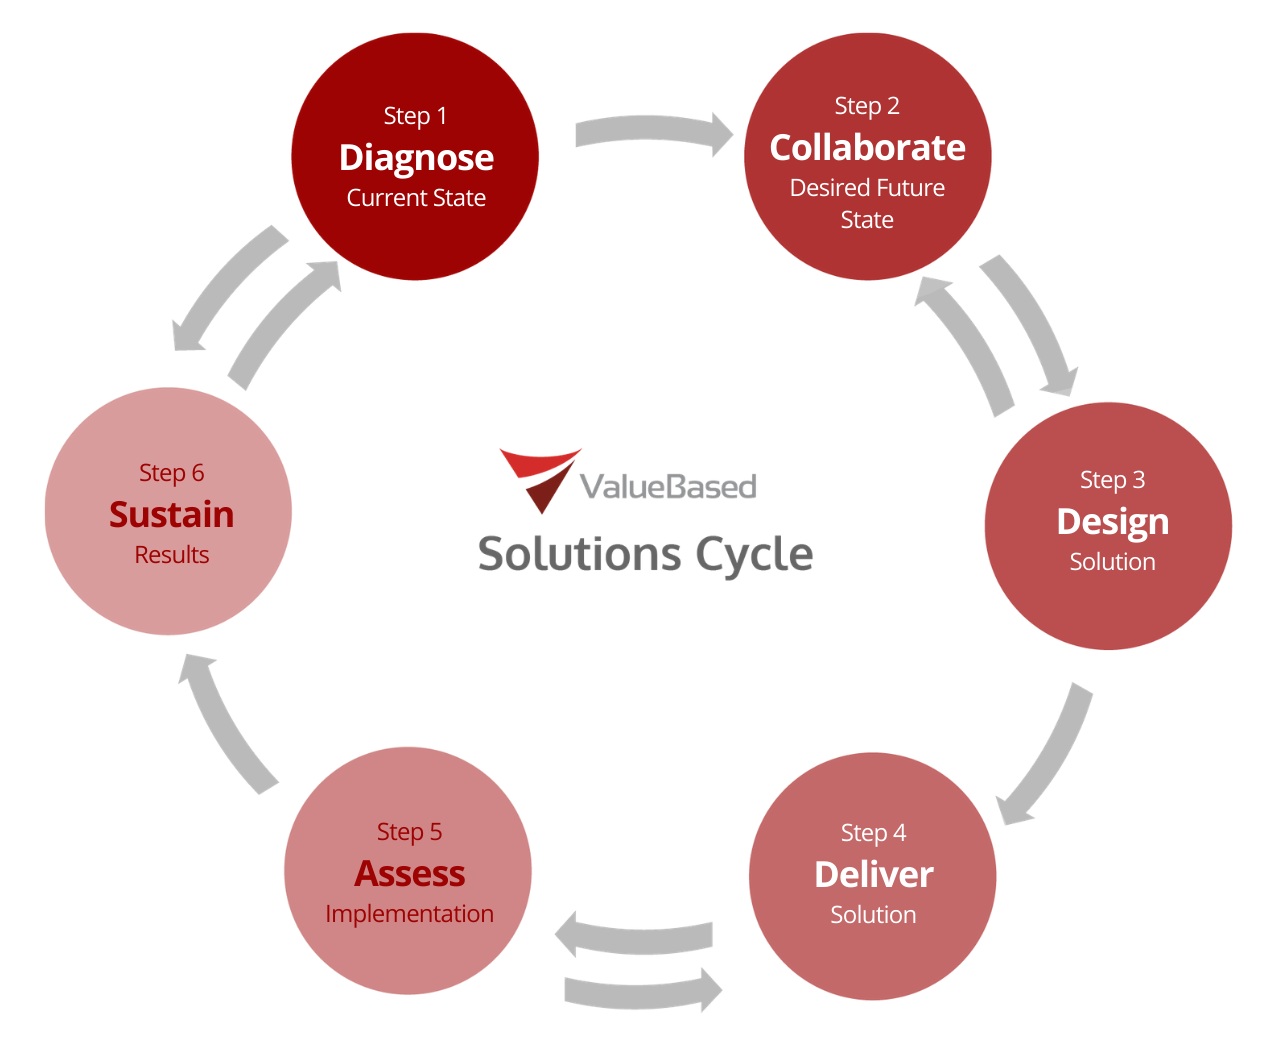 Value Based Solutions Cycle